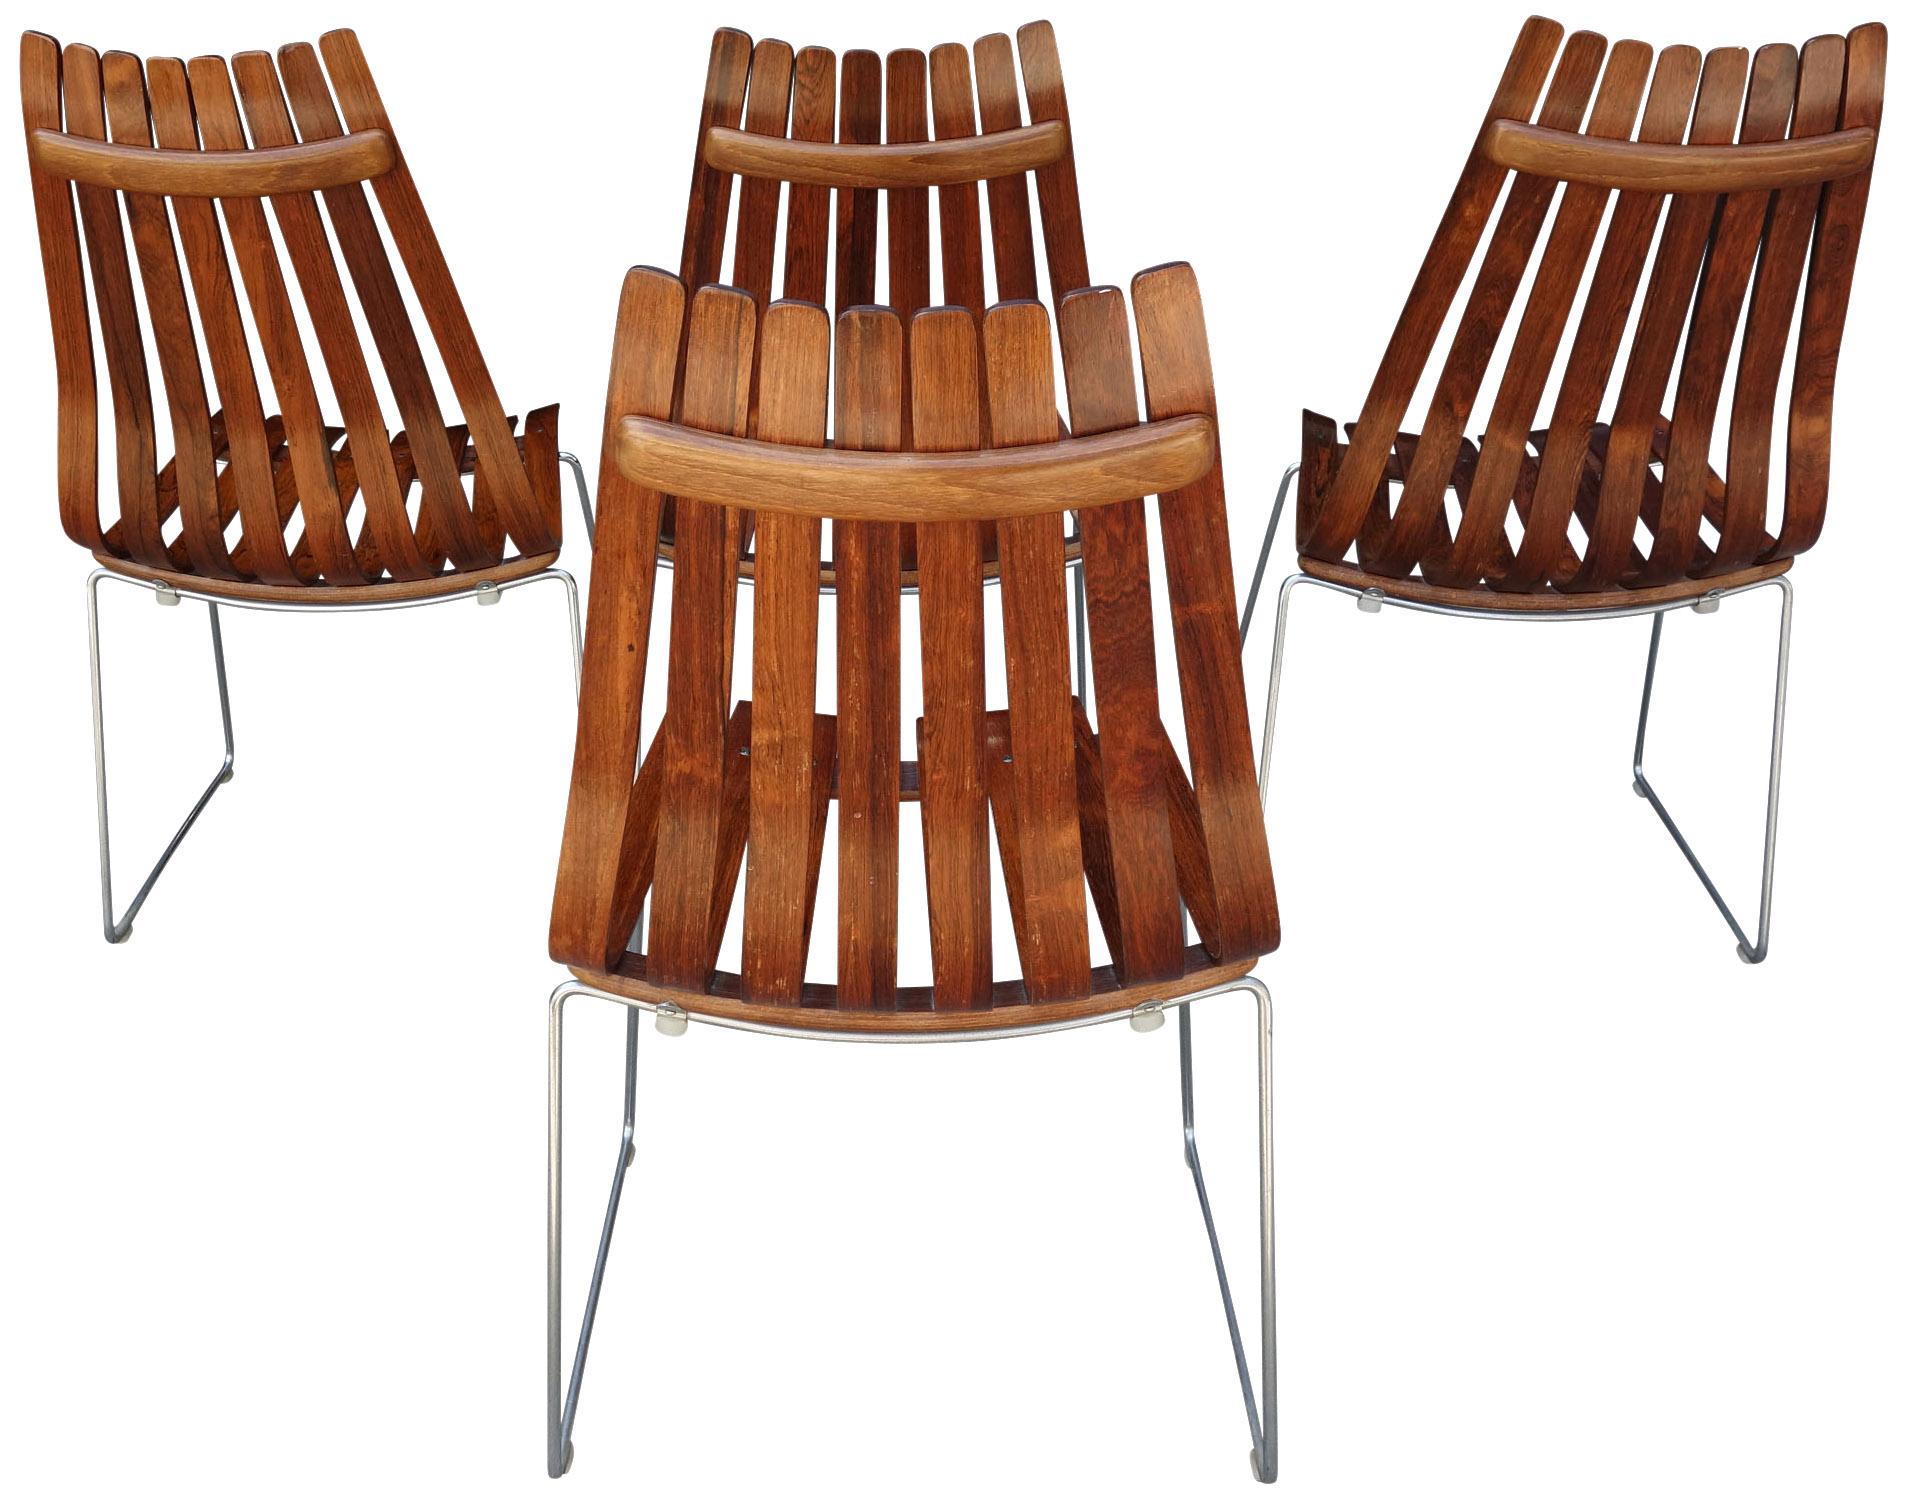 20th Century Midcentury Scandia Chairs by Hans Brattrud for Hove Mobler